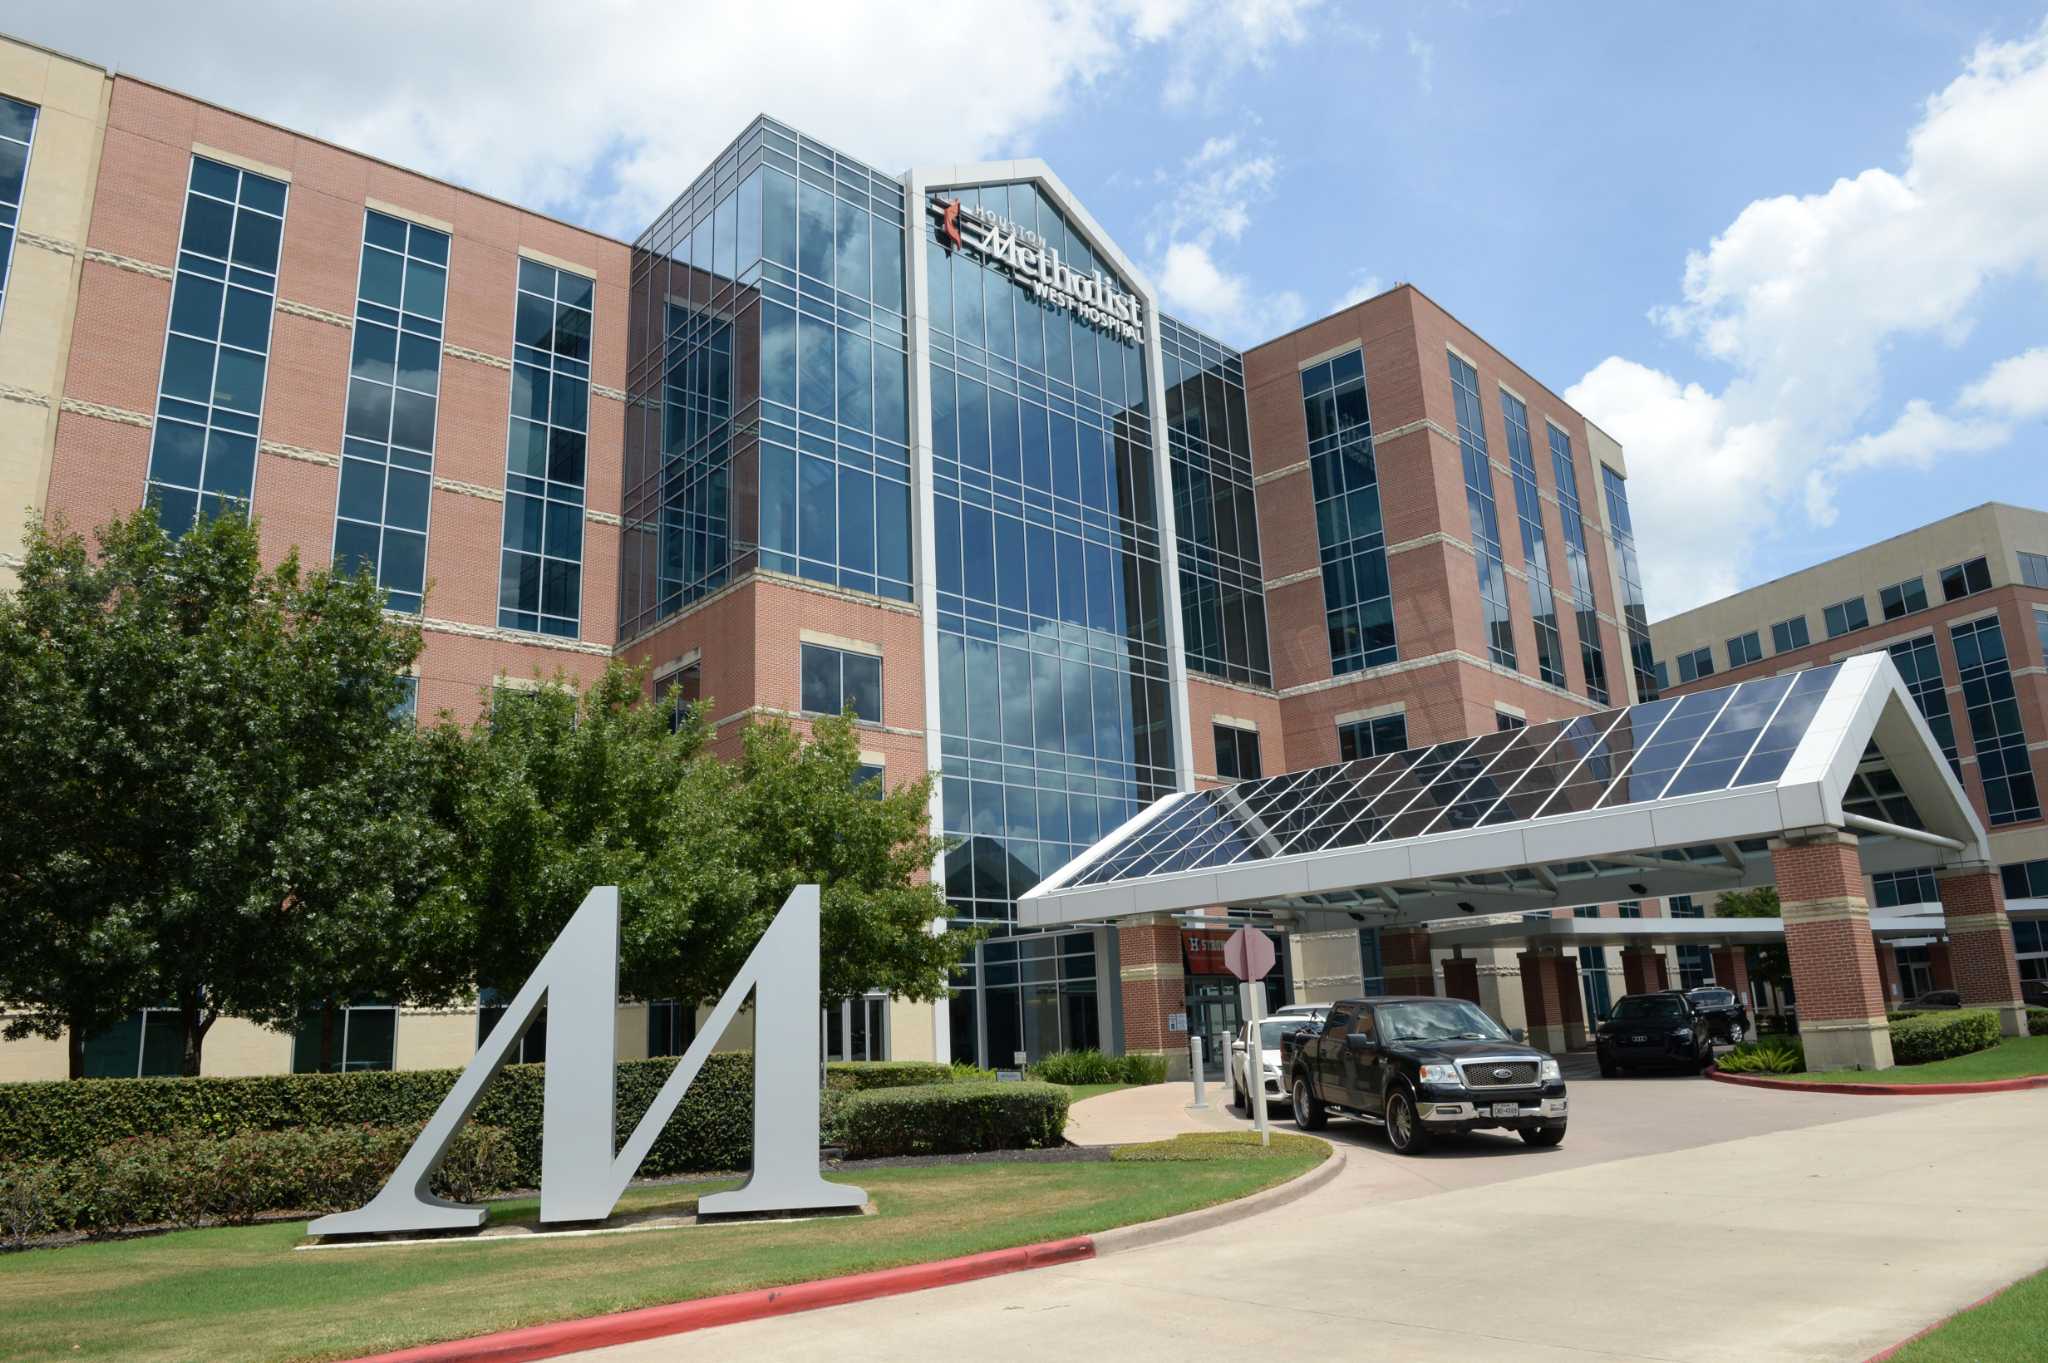 No contract in sight for Houston Methodist and United Healthcare